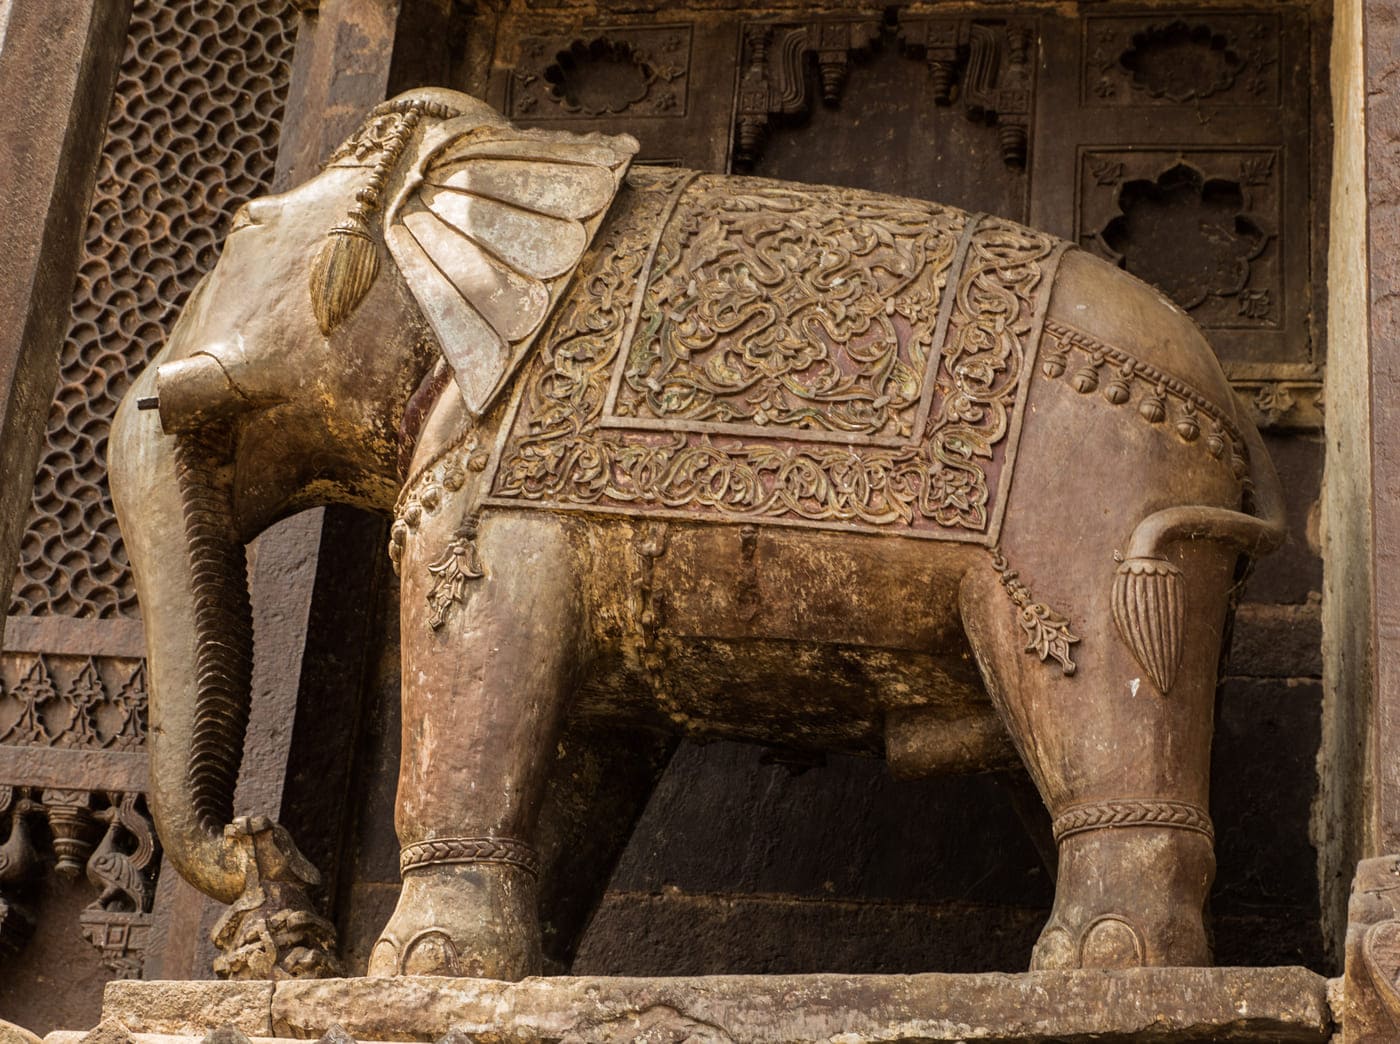 Closeup view of the beautifully caeved Stome elephant at the entrance of the Jahangir Mahal Palace, Orchha 